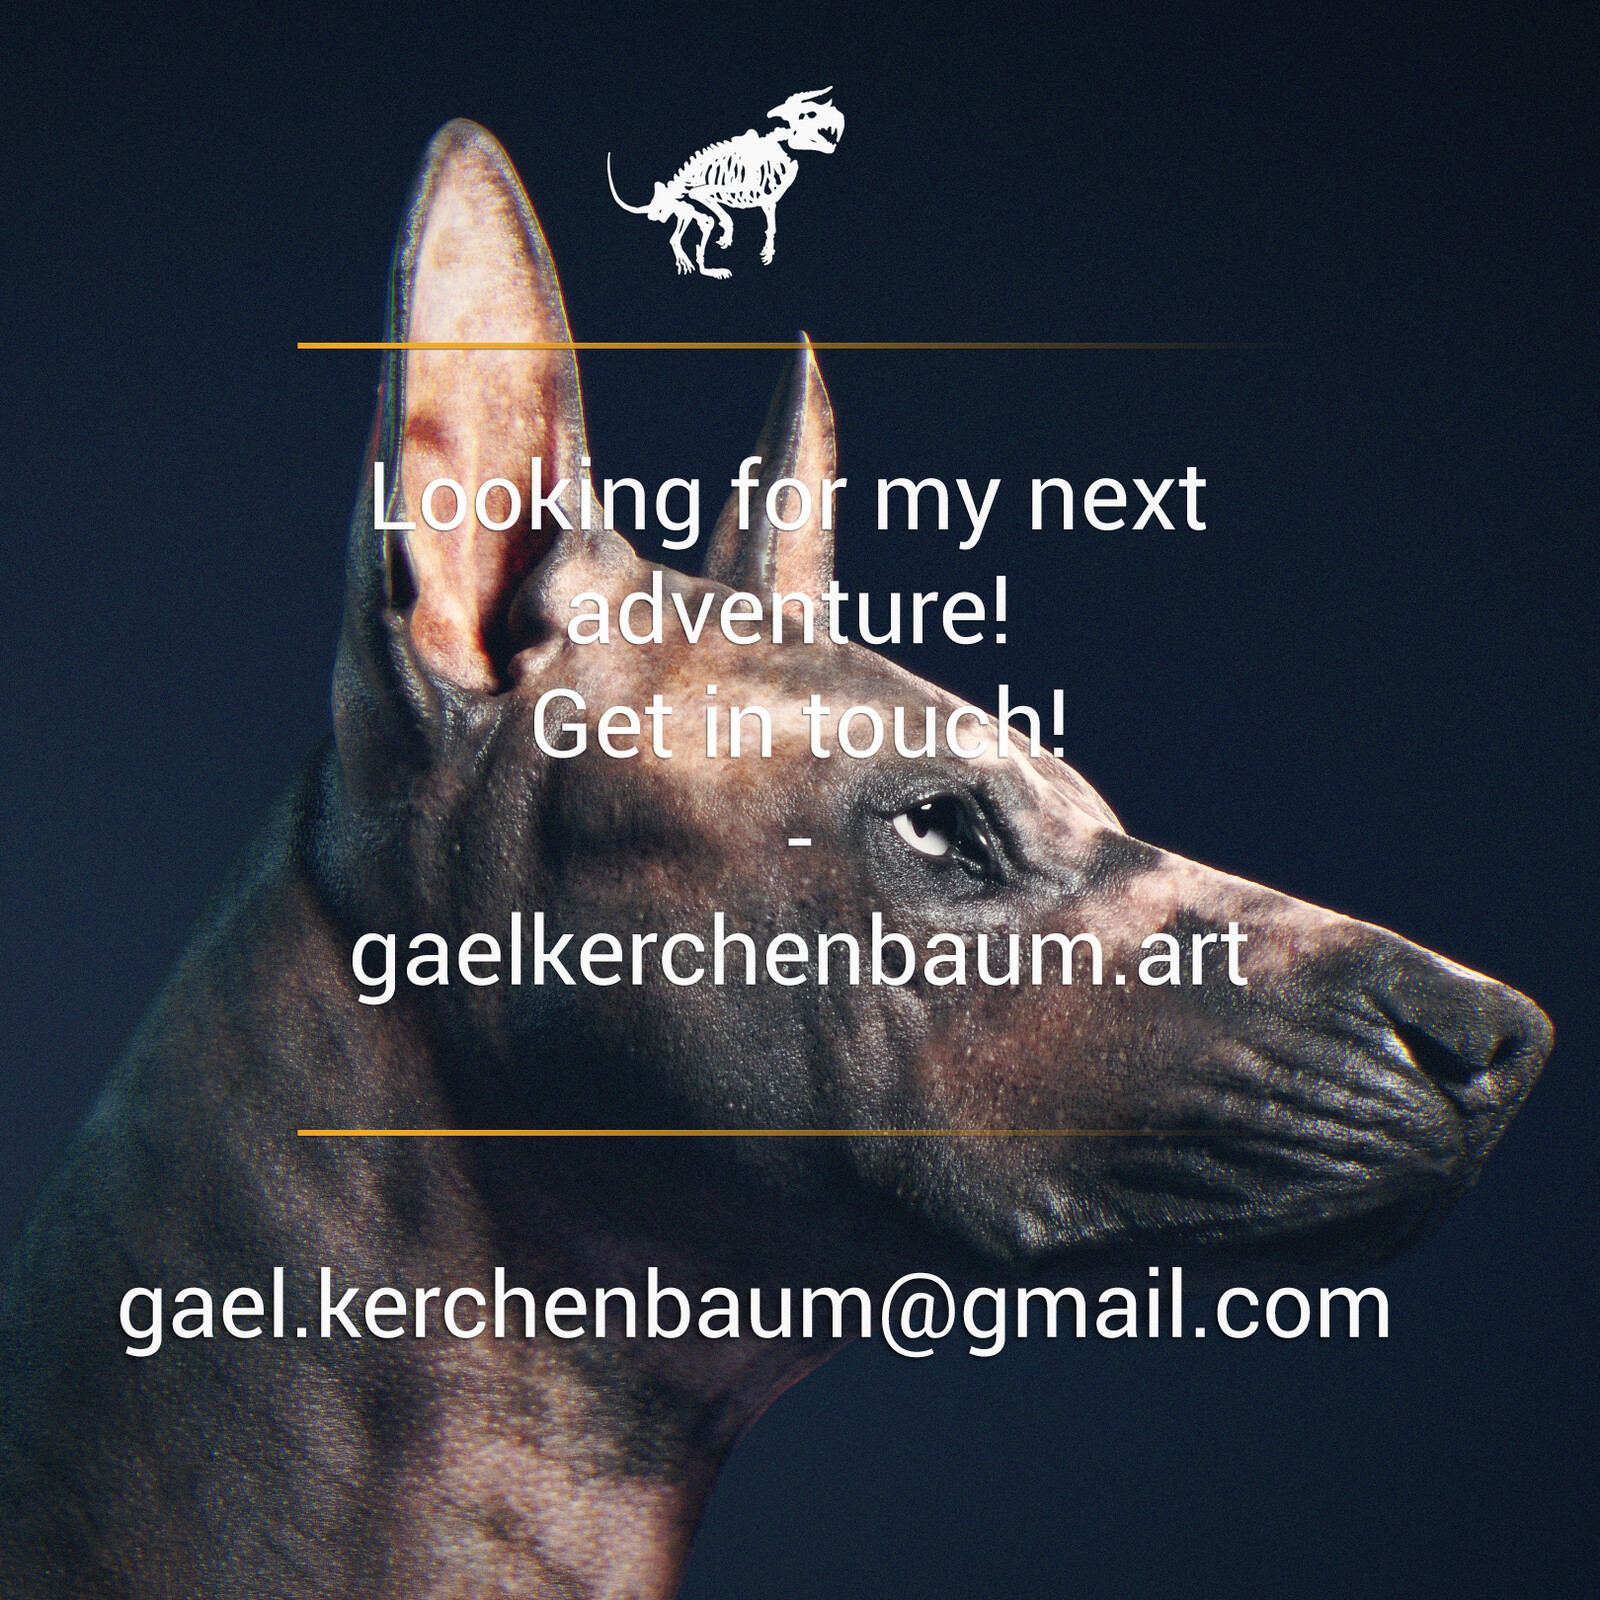 I am also currently looking for a new job. Feel free to get in touch if you need an expert in Creatures!